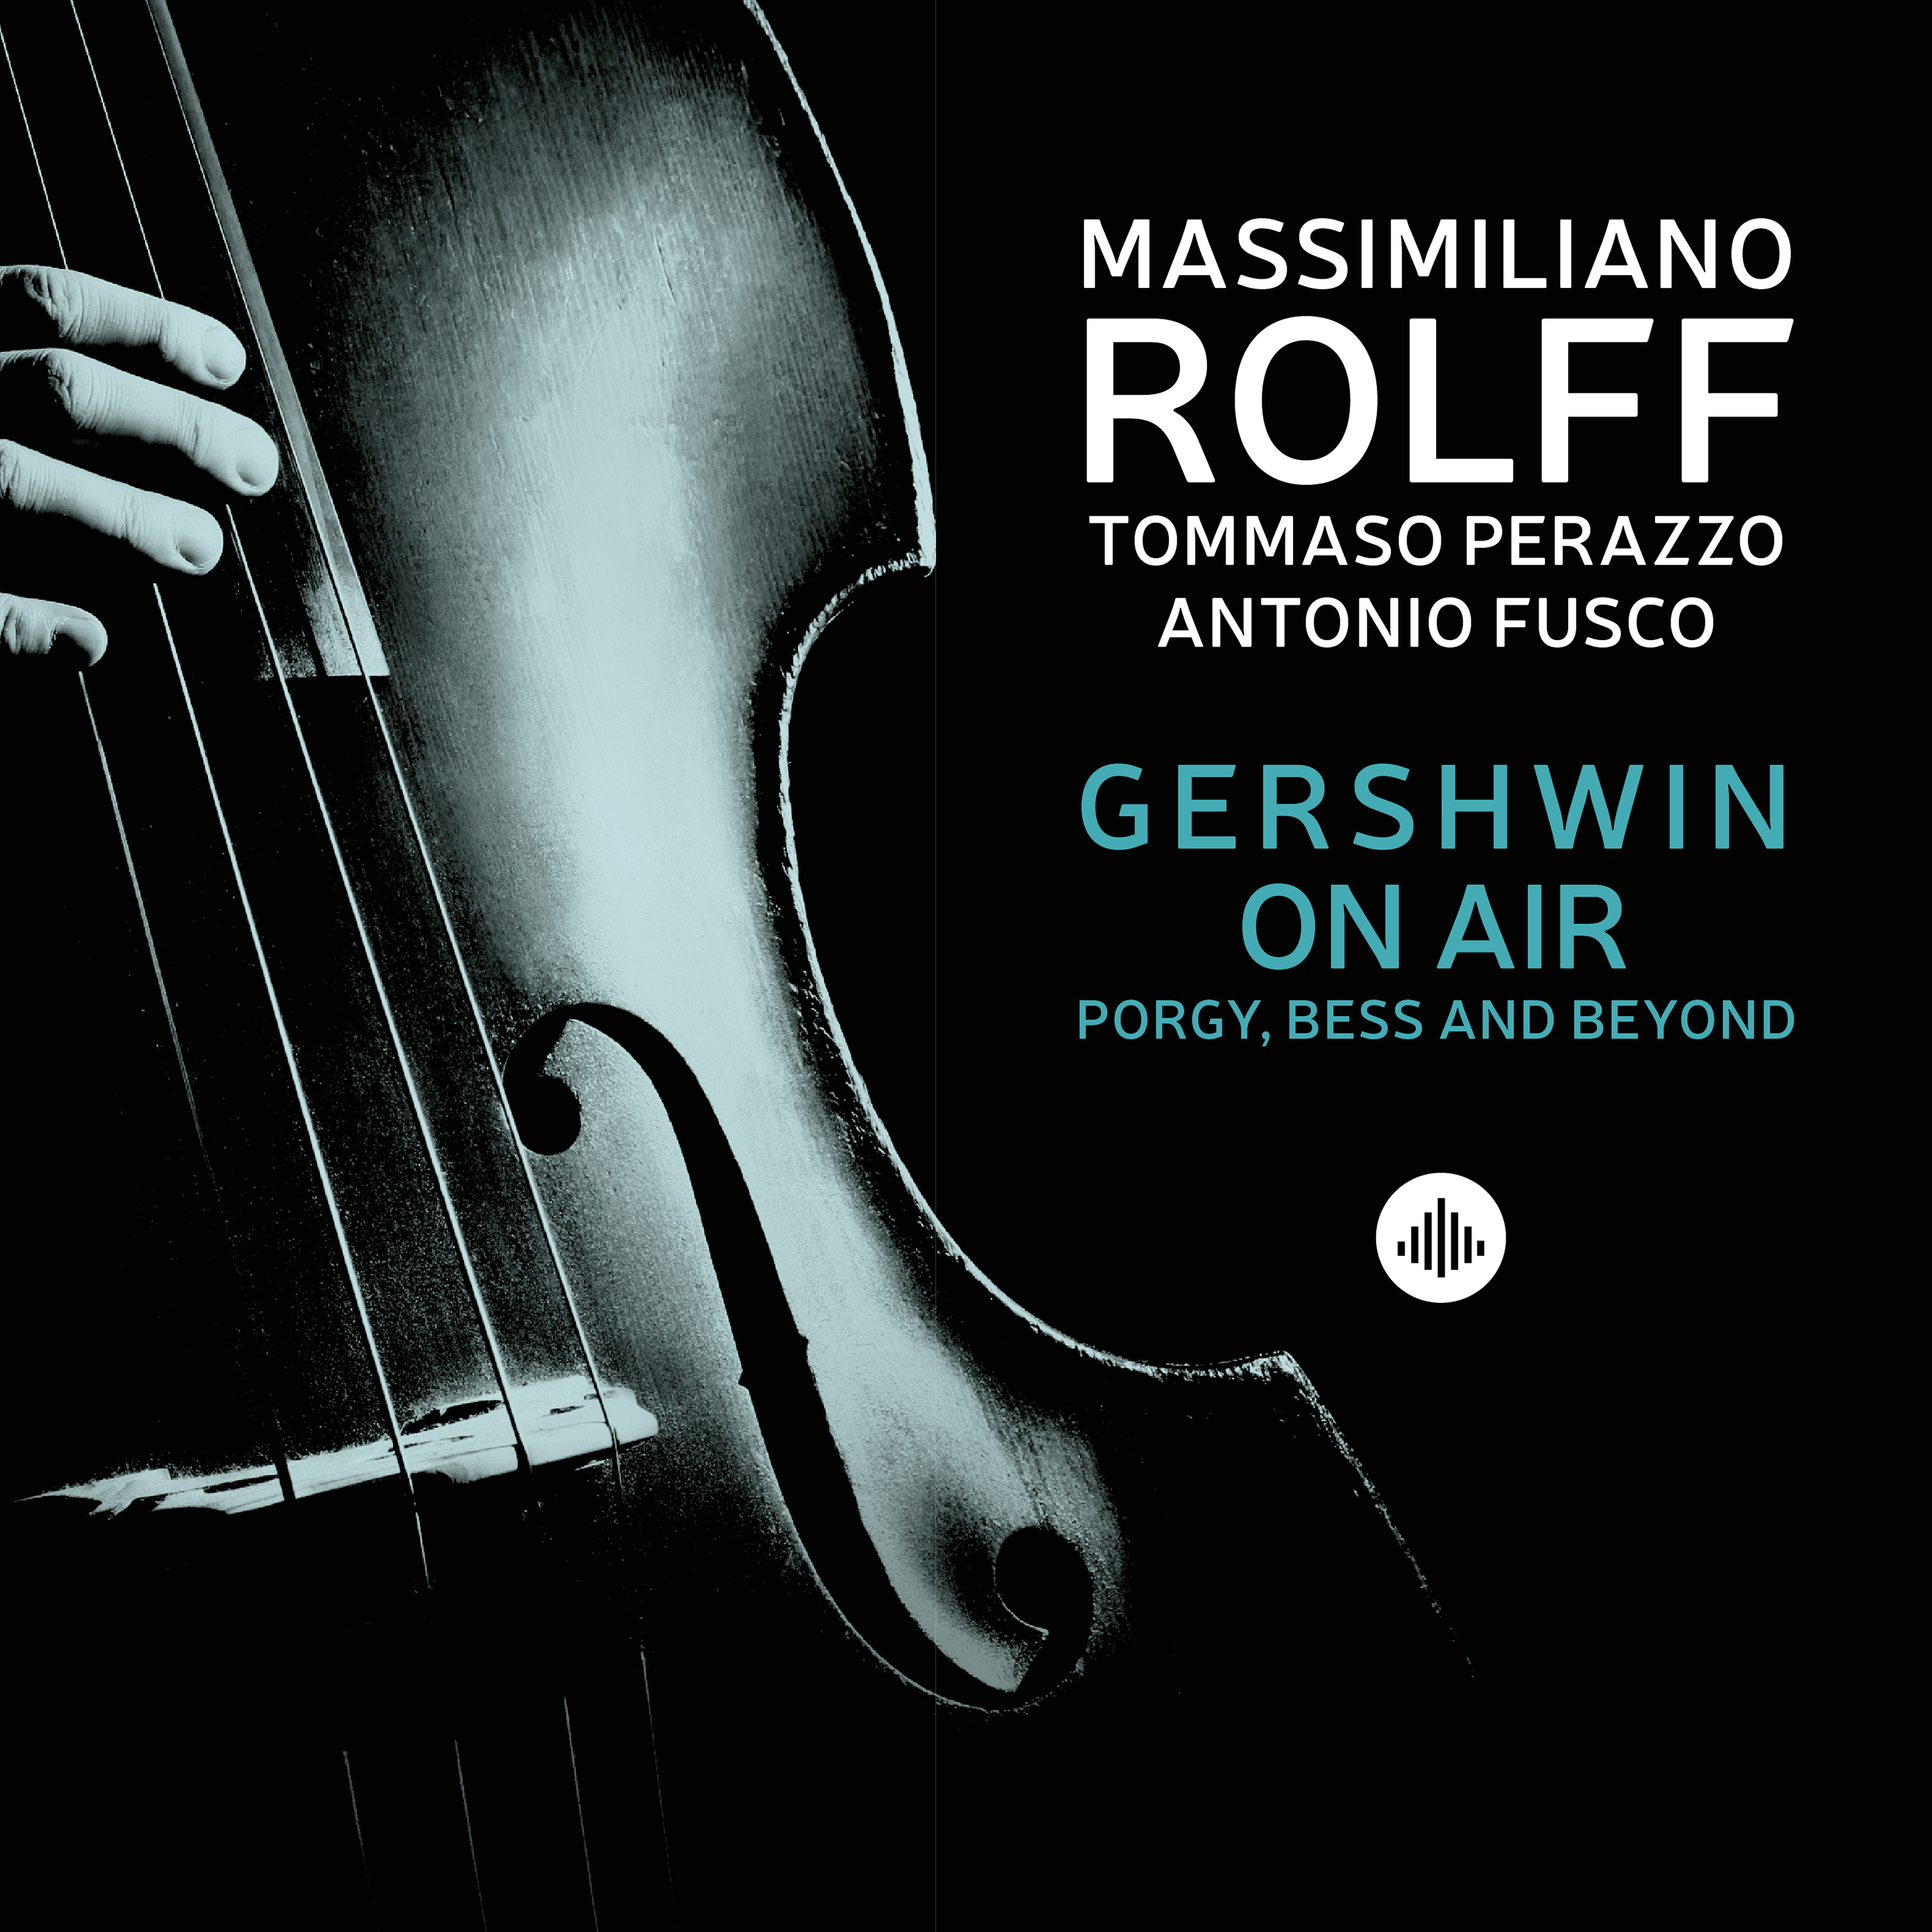 MASSIMILIANO ROLFF - Gershwin on Air - Porgy, Bess and Beyond cover 